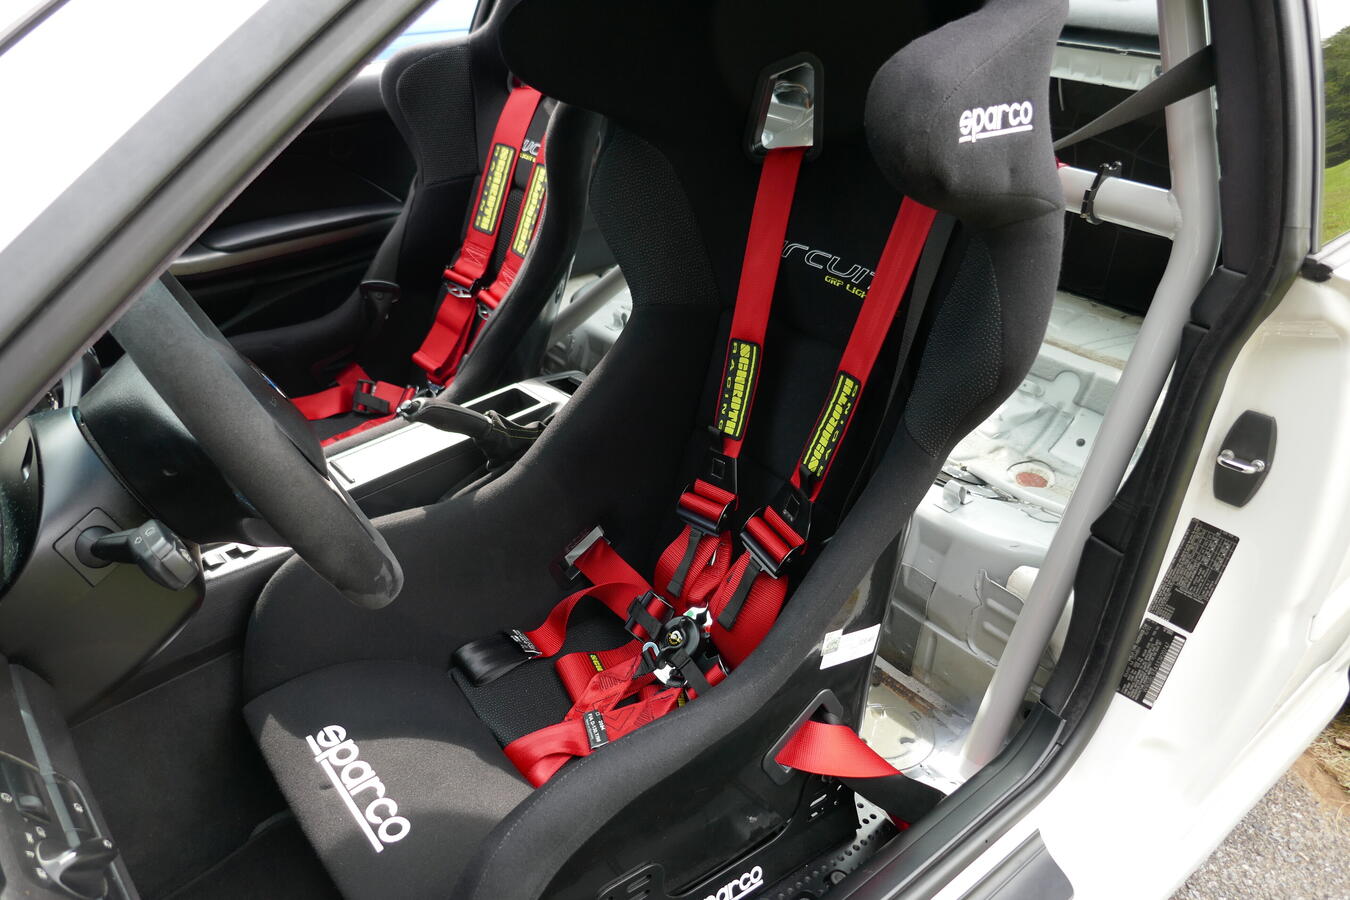 Let's see your e46 m3 Interior - NA M3 Forums